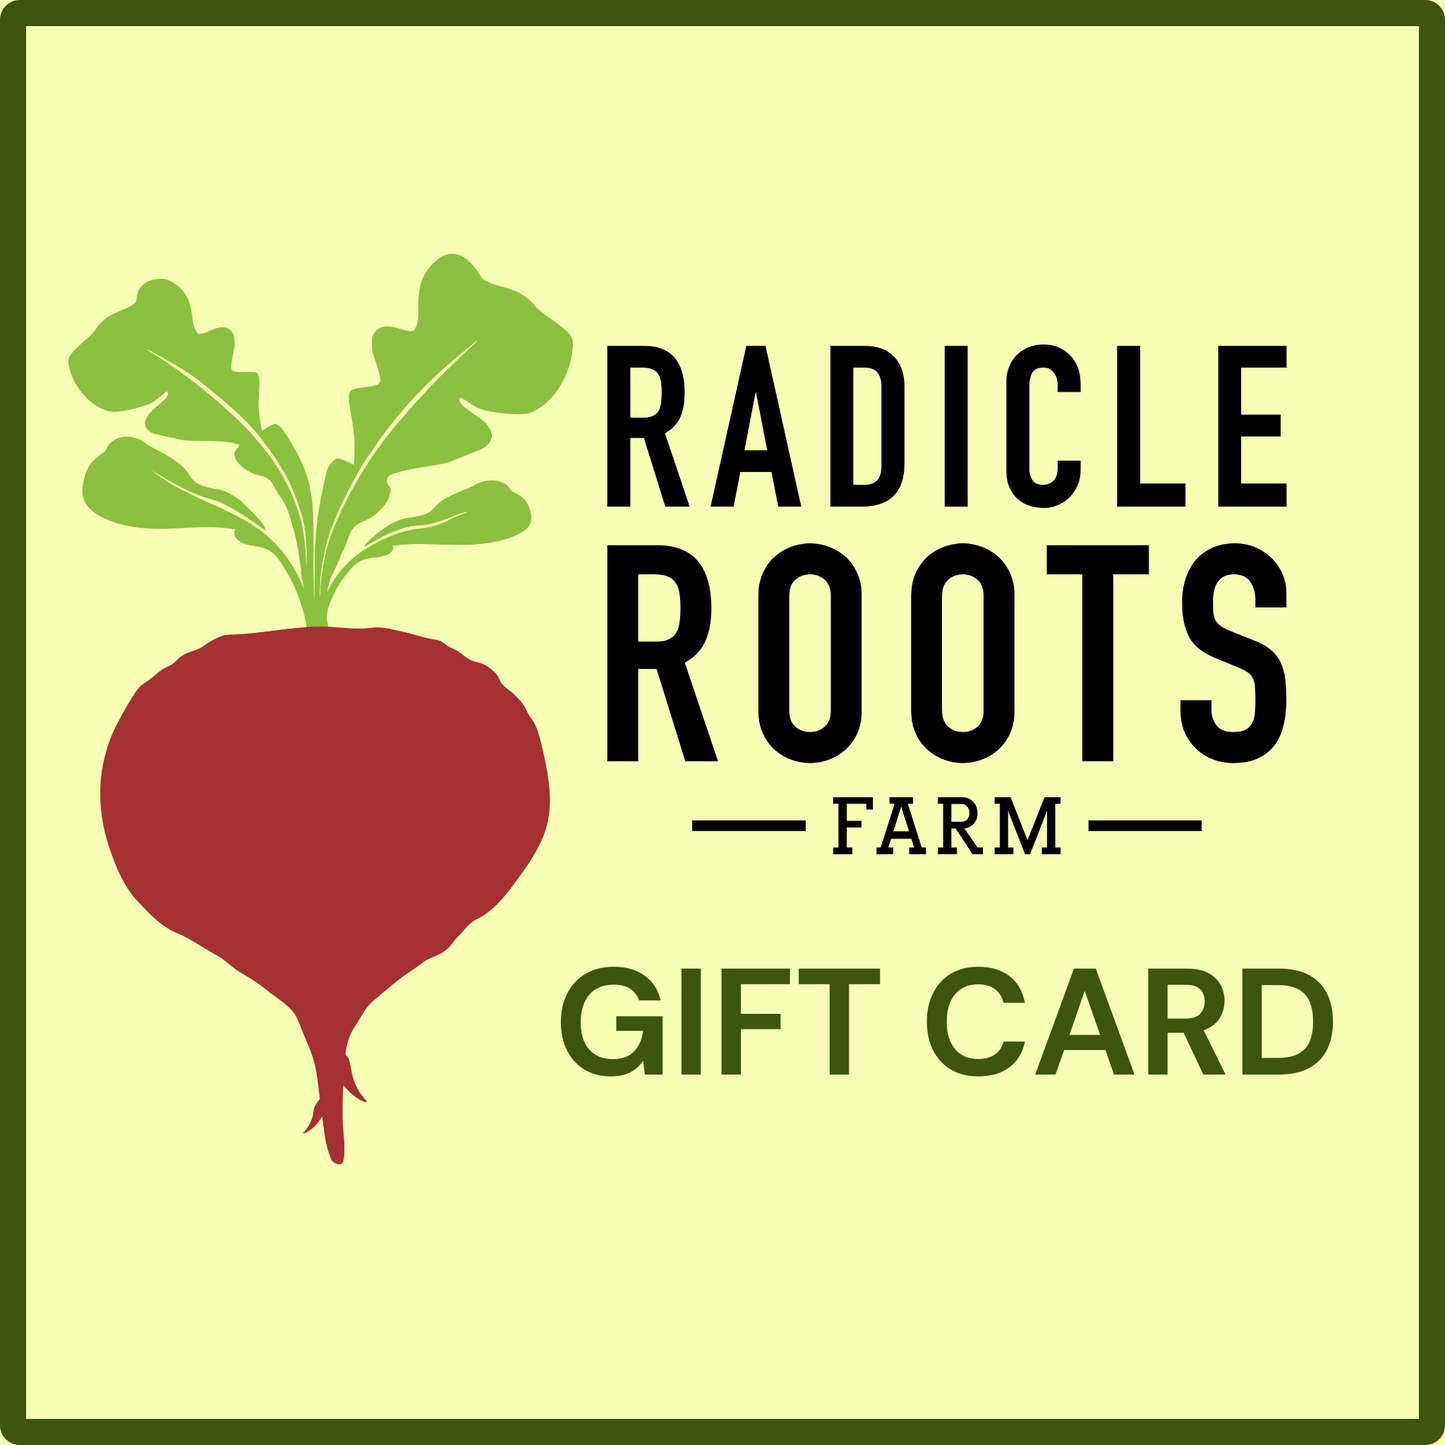 Radicle Roots farm gift card